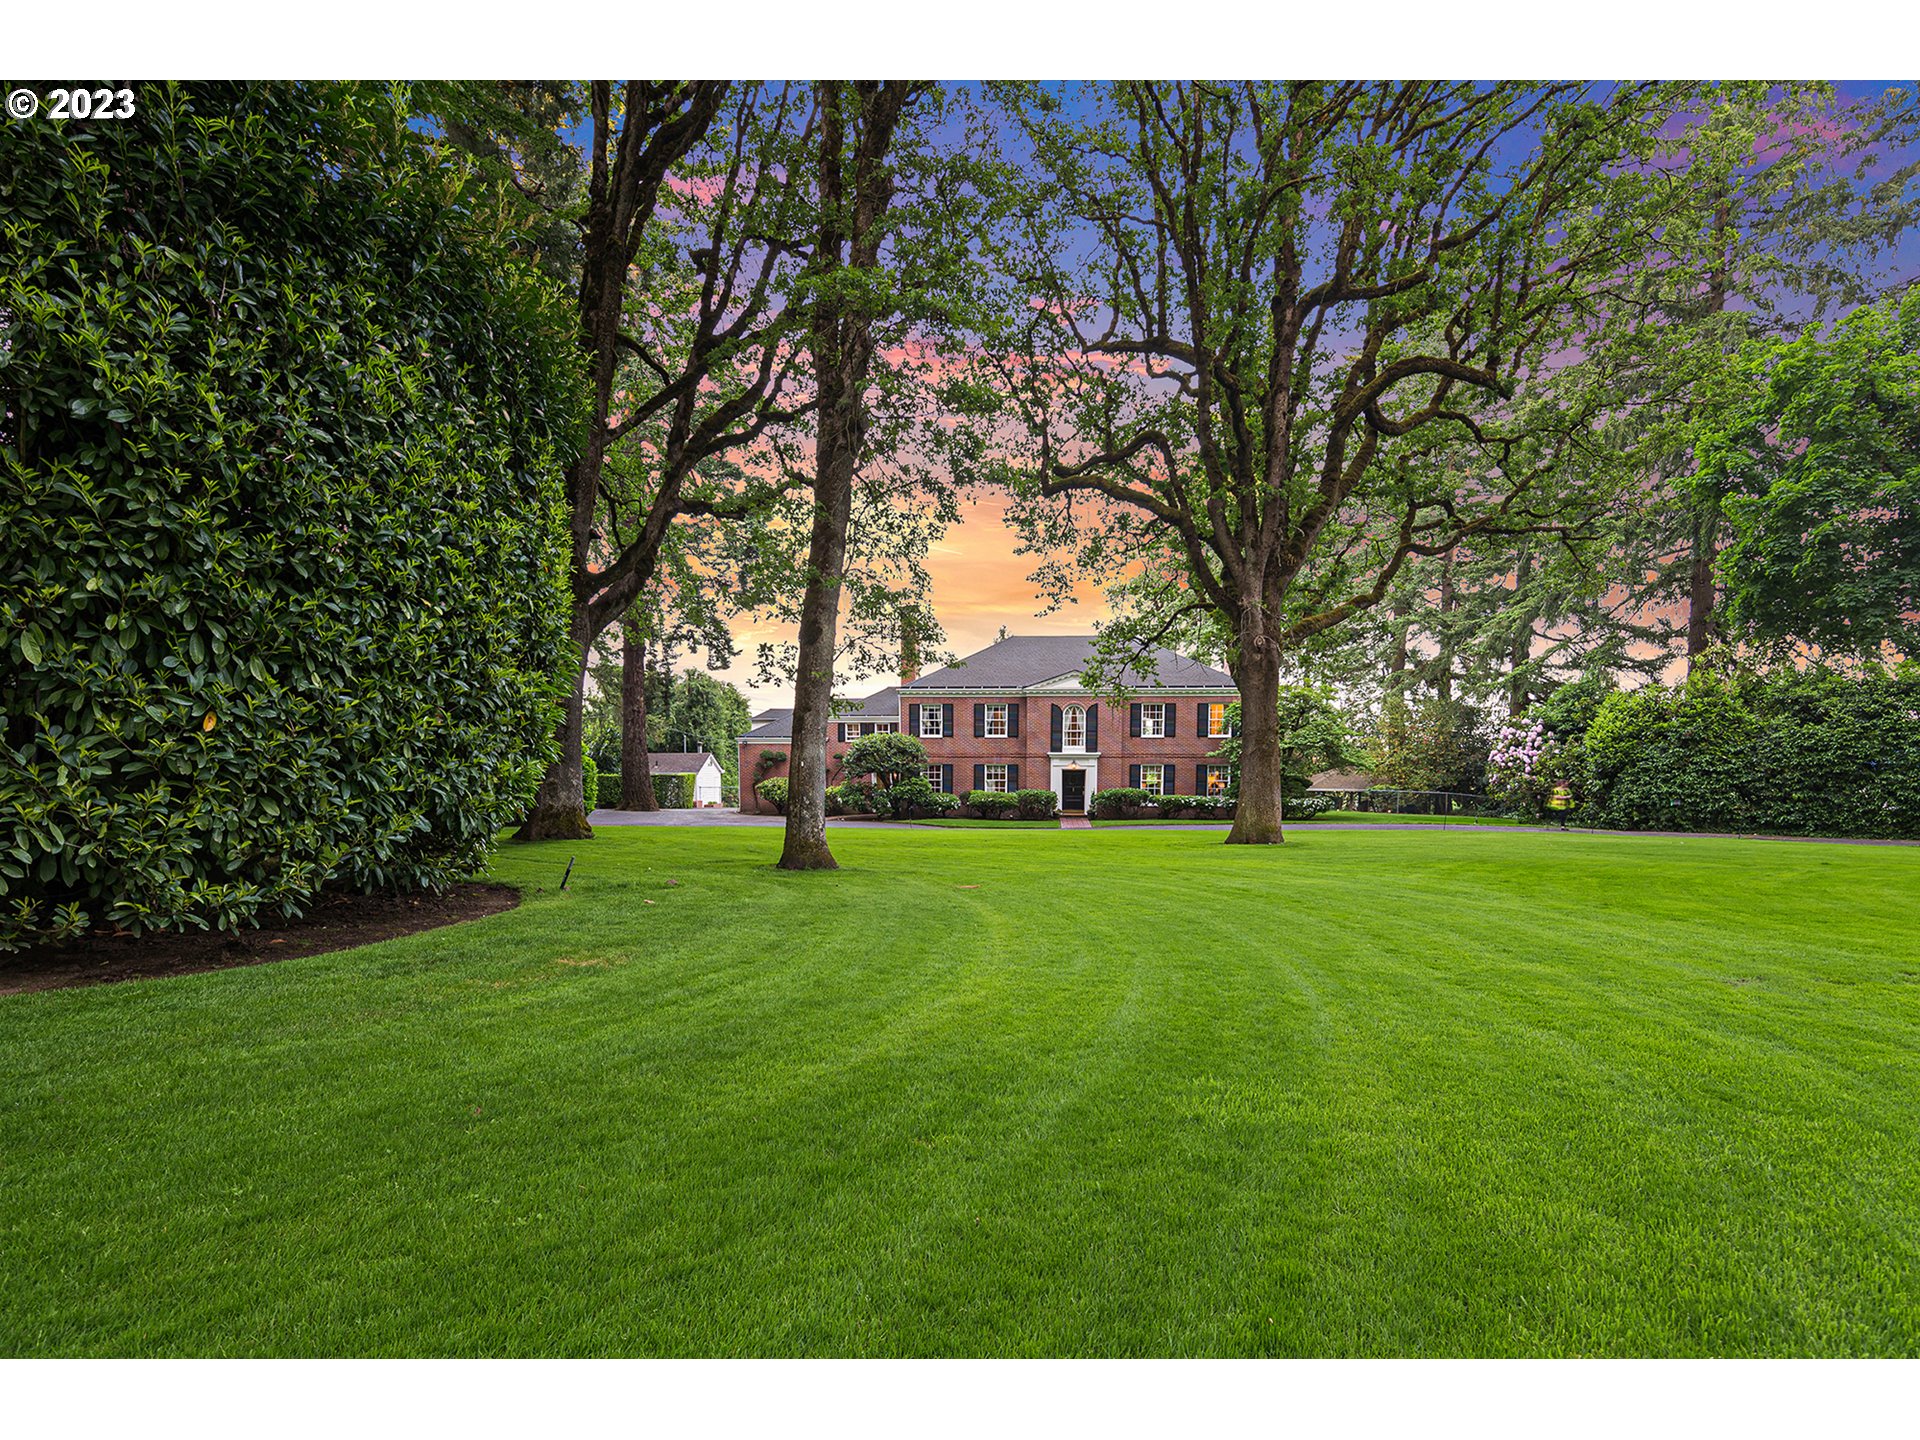 Rare opportunity to reimagine one of Portland's most prominent estates located in Dunthorpe and designed by Herman Brookman on an incredible 1.55-acre lot. This Georgian-style home represents a bygone era with timeless details in a spectacular setting. Available for only the 5th time since it was built in 1939, this home has deep architectural roots and is ready for a new curator to take it into its second century. Known for the M. Lloyd Frank estate, AKA the Lewis & Clark Manor House, Menucha, the Julius Meier estate in Corbett and the Lee S. Elliot house, Brookman was a master architect who left a legacy of some of the area's most remarkable homes.  Complete with a pool fit for the Rat Pack, glorious views, including Mt. Hood from the primary suite, this home's classic design is ready for the next generation to enjoy life on the tree-lined streets of Dunthorpe.